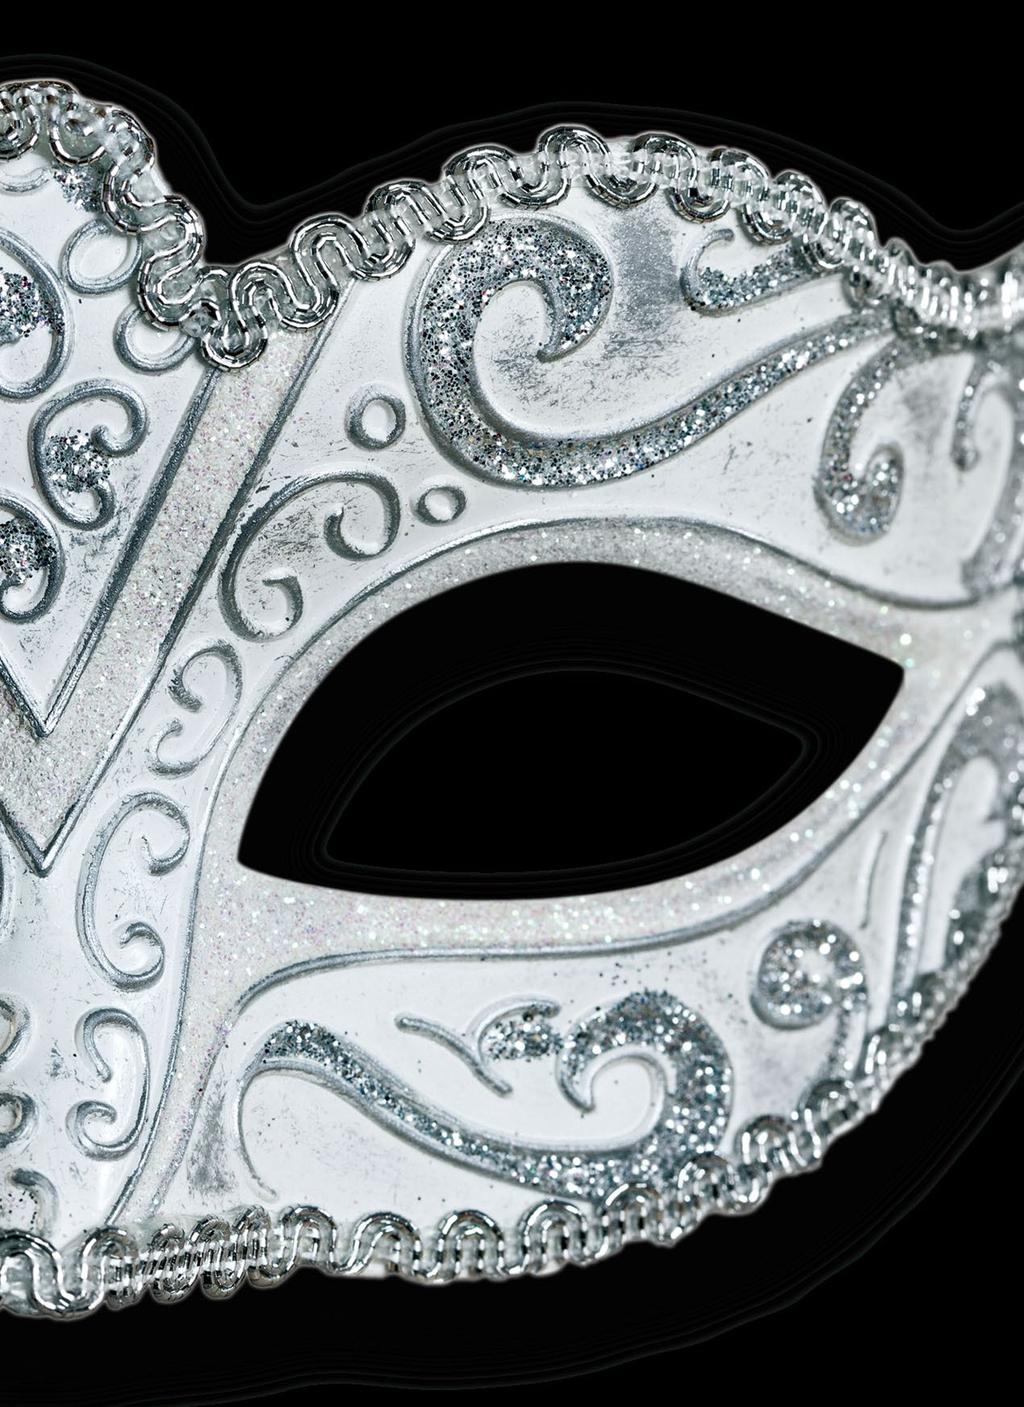 At a Glance The UNCF Mayor's Masked Ball is a premier fundraising gala and a major social event, focusing on raising public awareness and large corporate and individual donations to support deserving